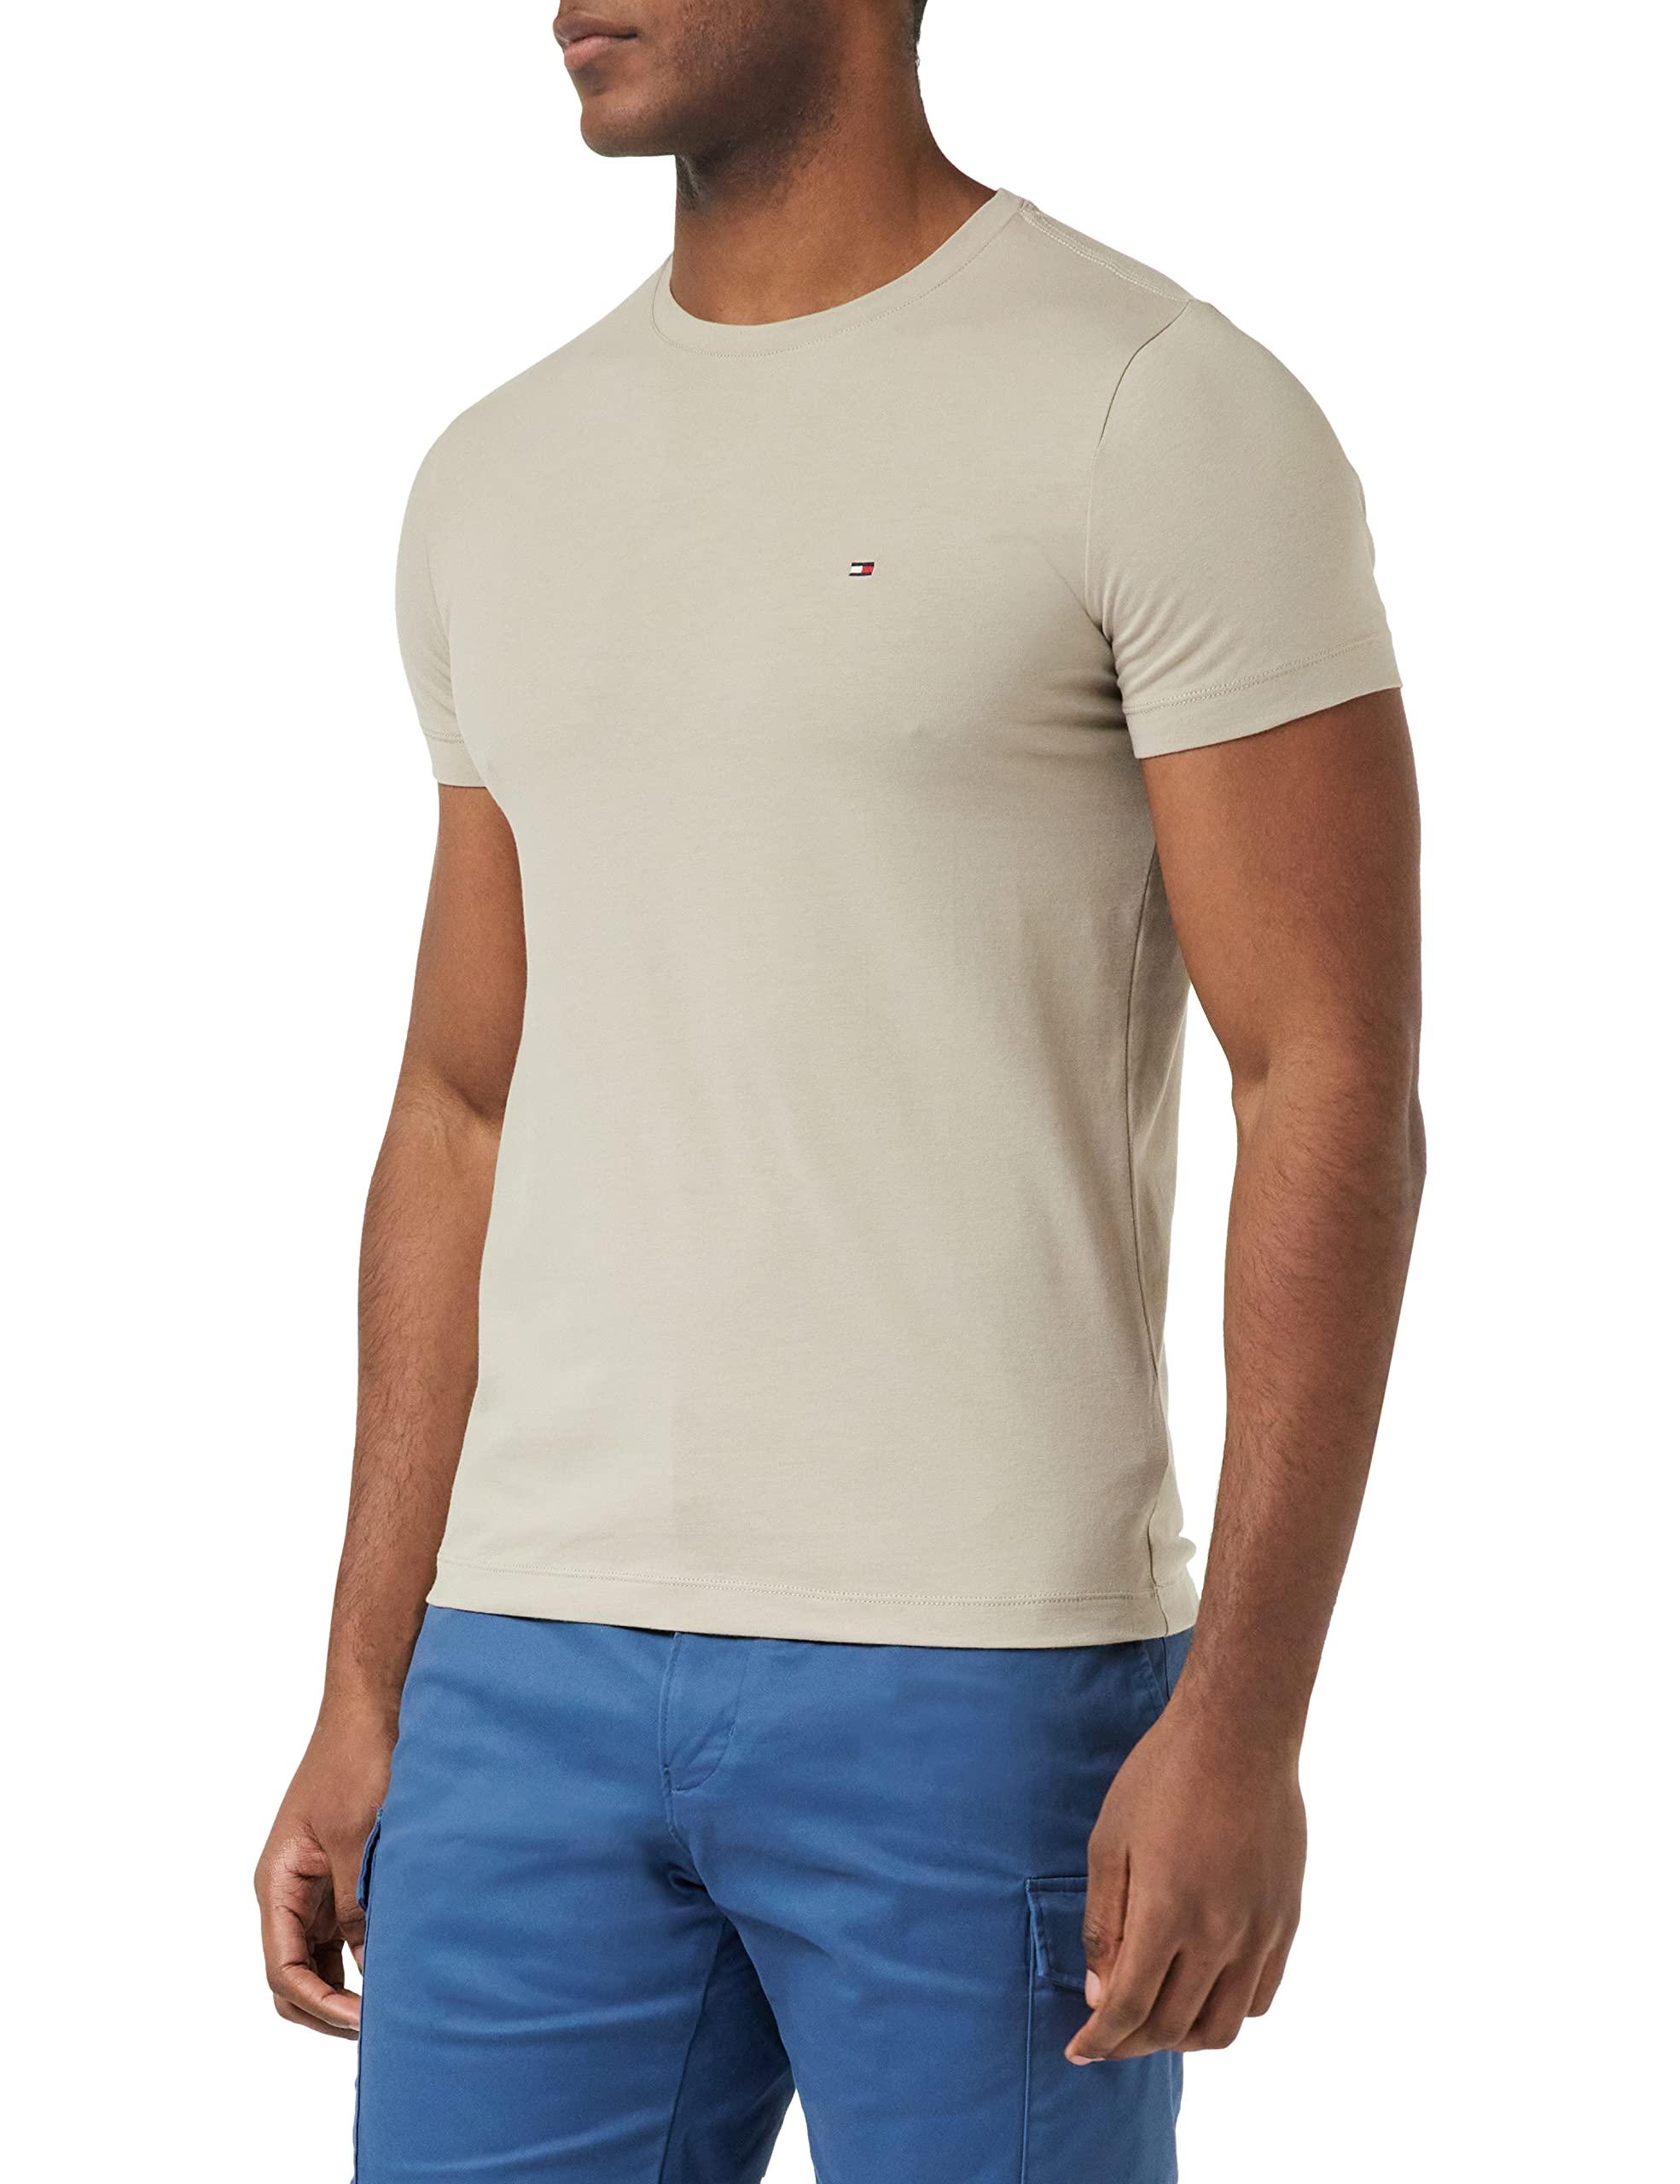 SLIM FIT TEE T-shirt Basique Faded Military | poligin.rs